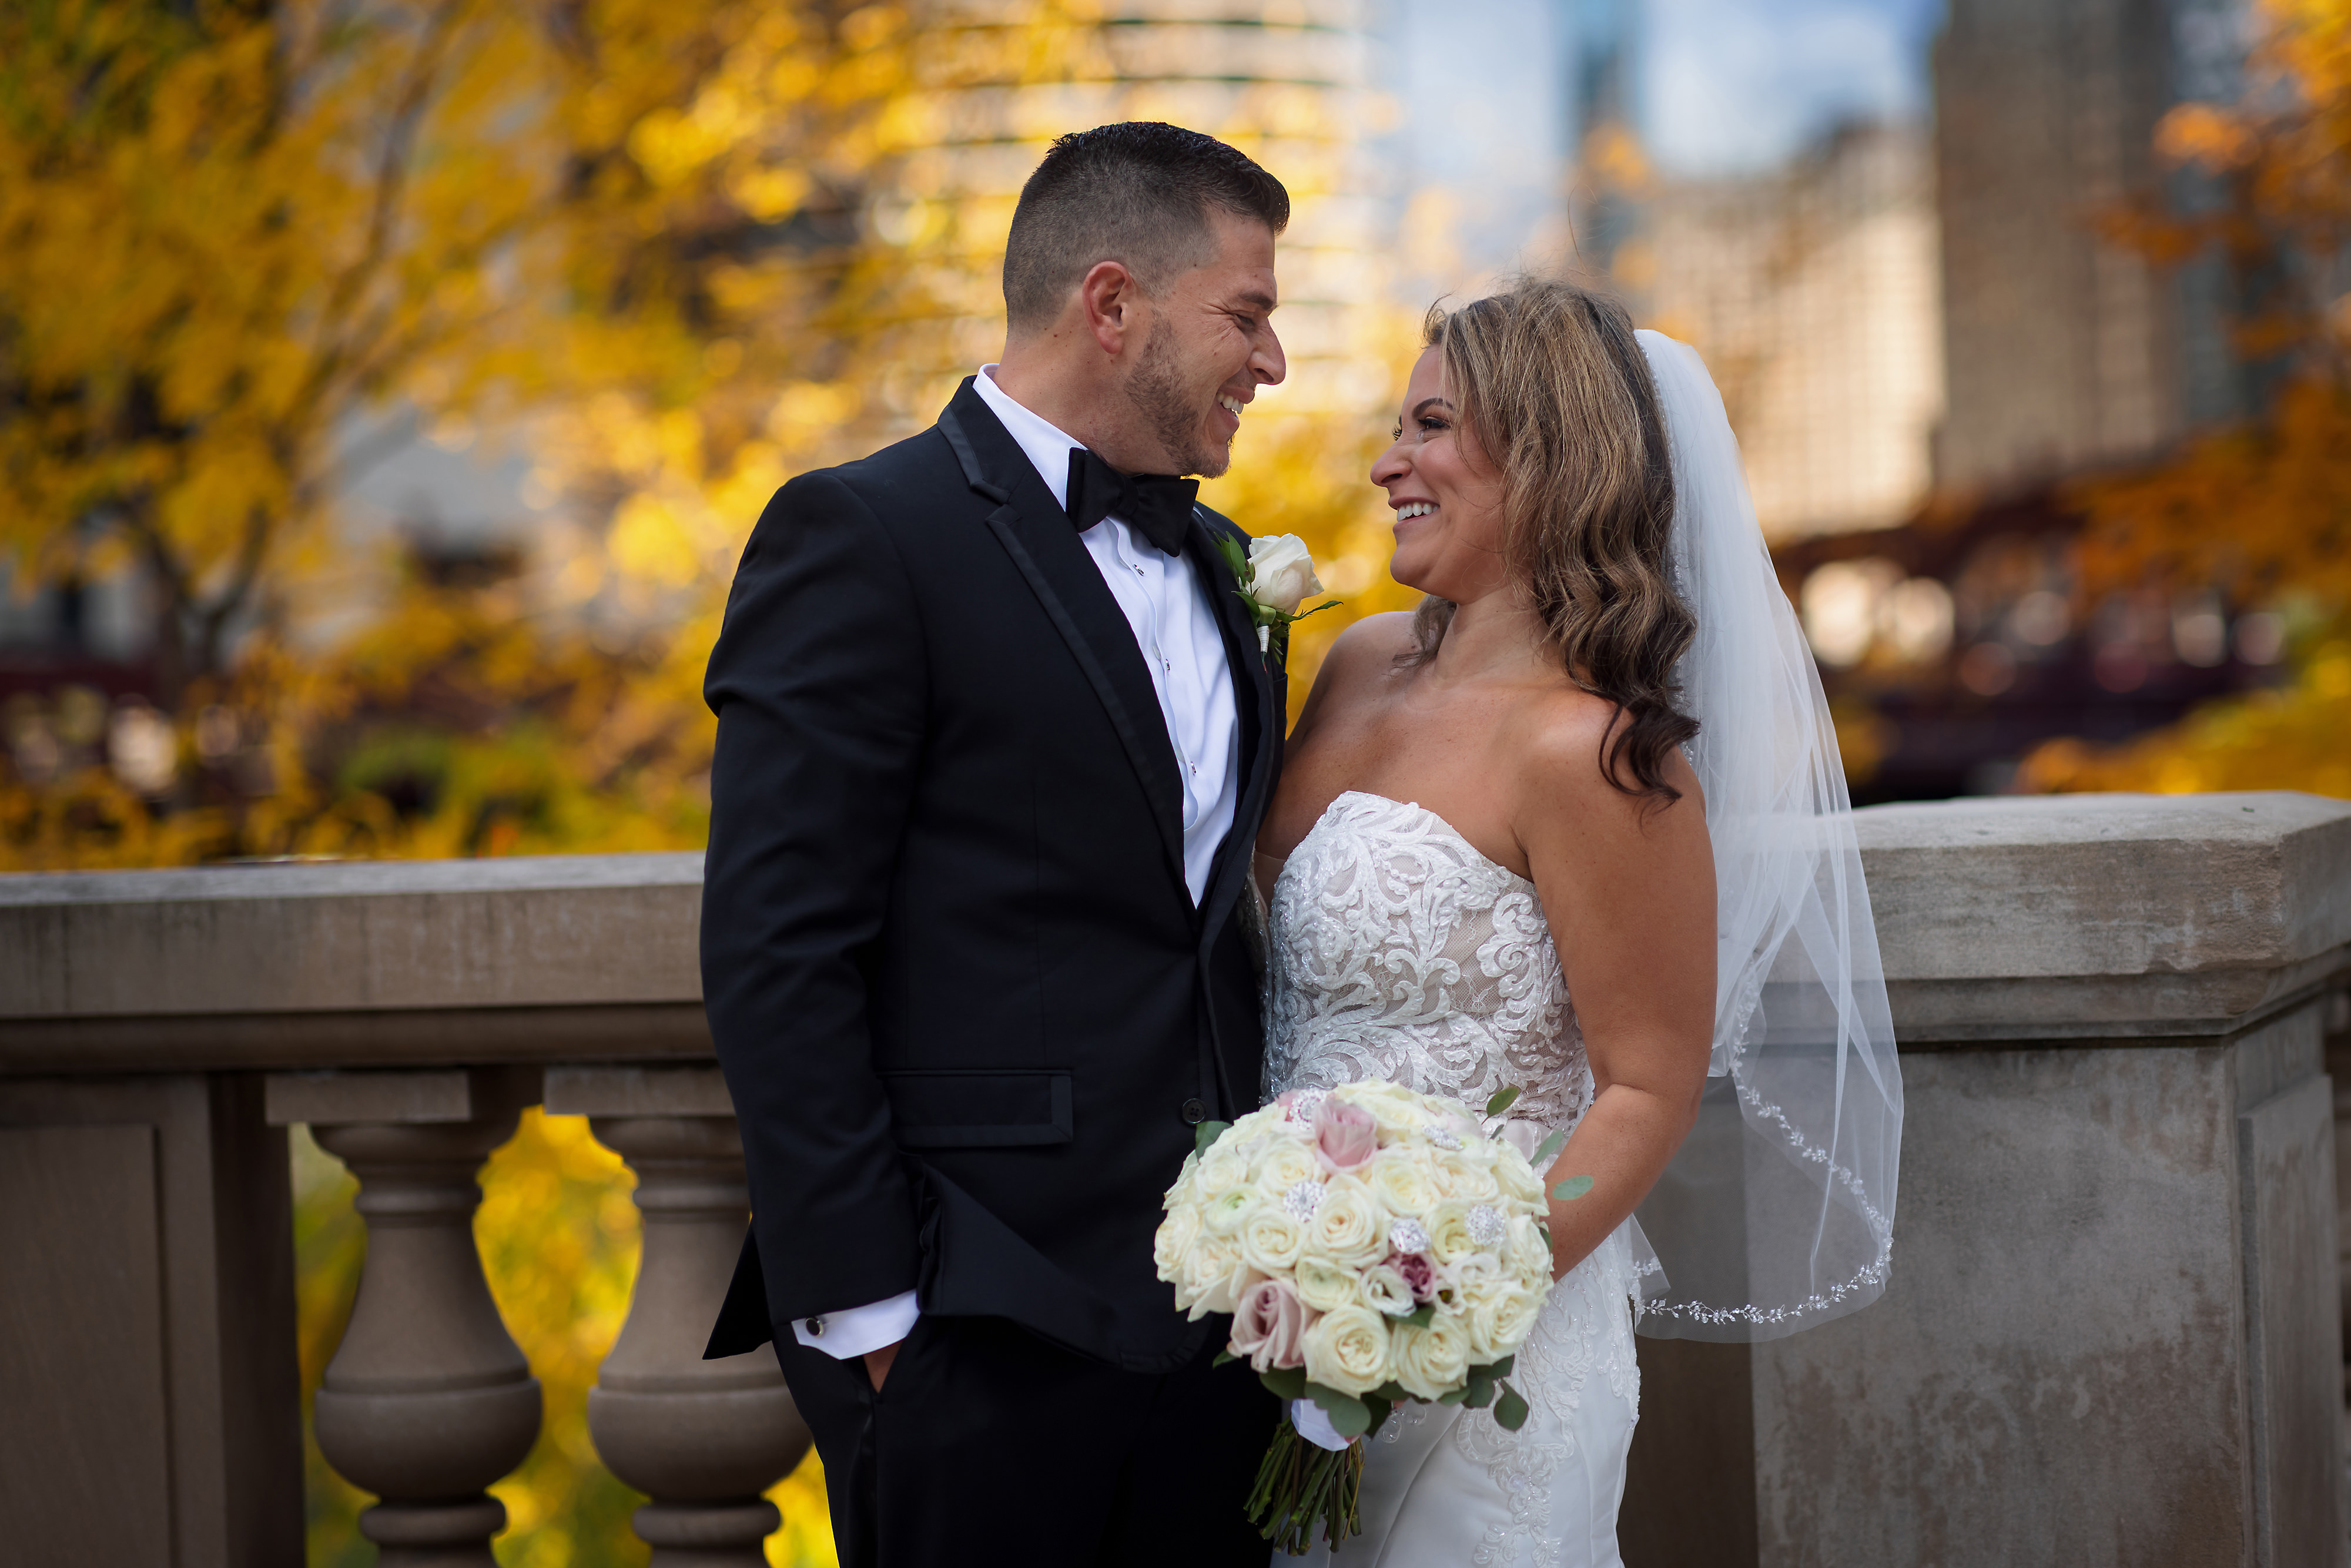 Bride and groom on LaSalle street in downtown Chicago during wedding portraits with fall color trees in background.